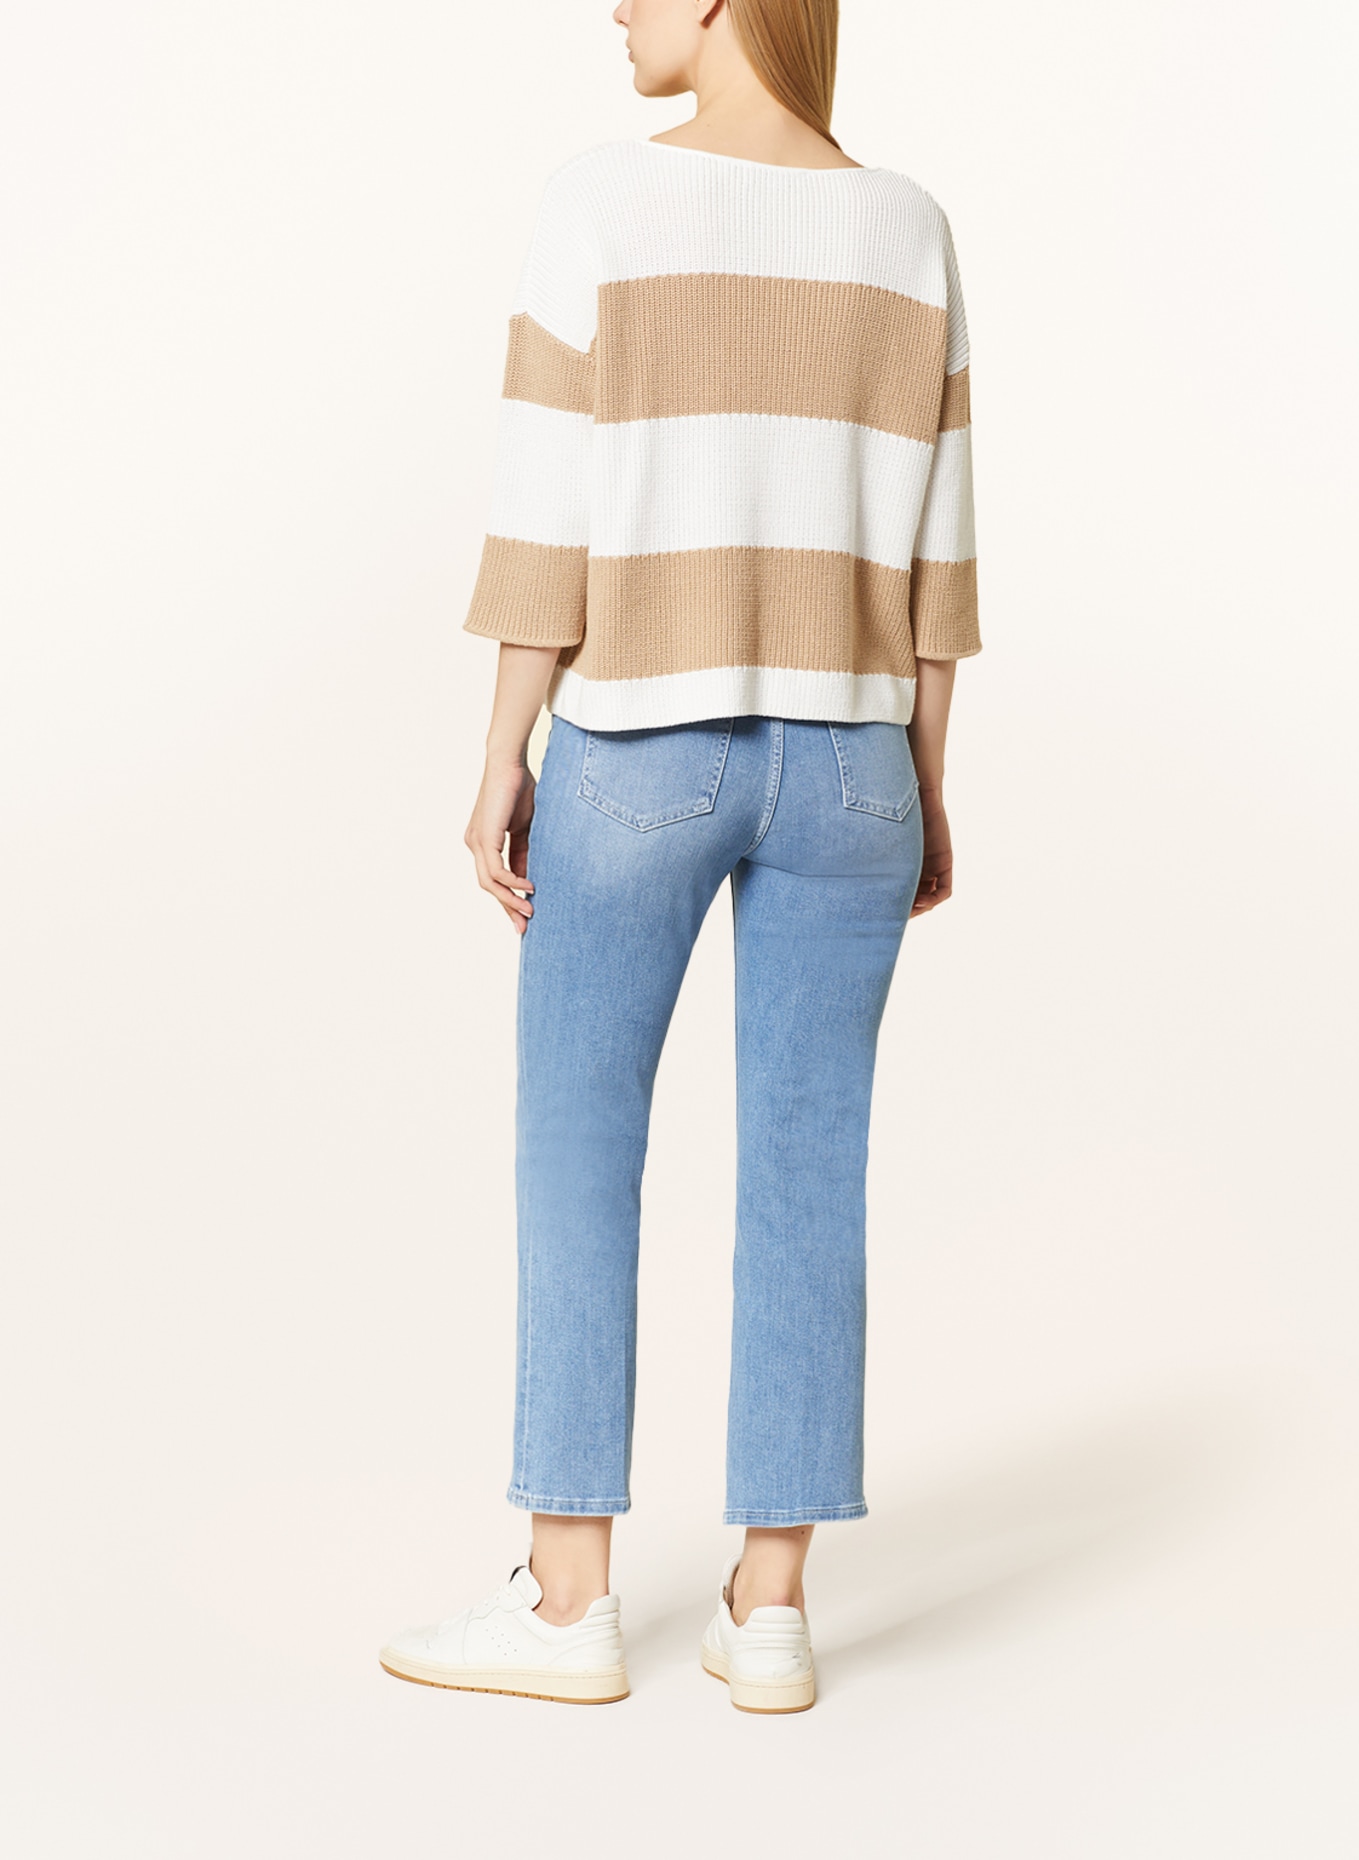 comma casual identity Pullover mit 3/4-Arm, Farbe: CAMEL/ WEISS (Bild 3)